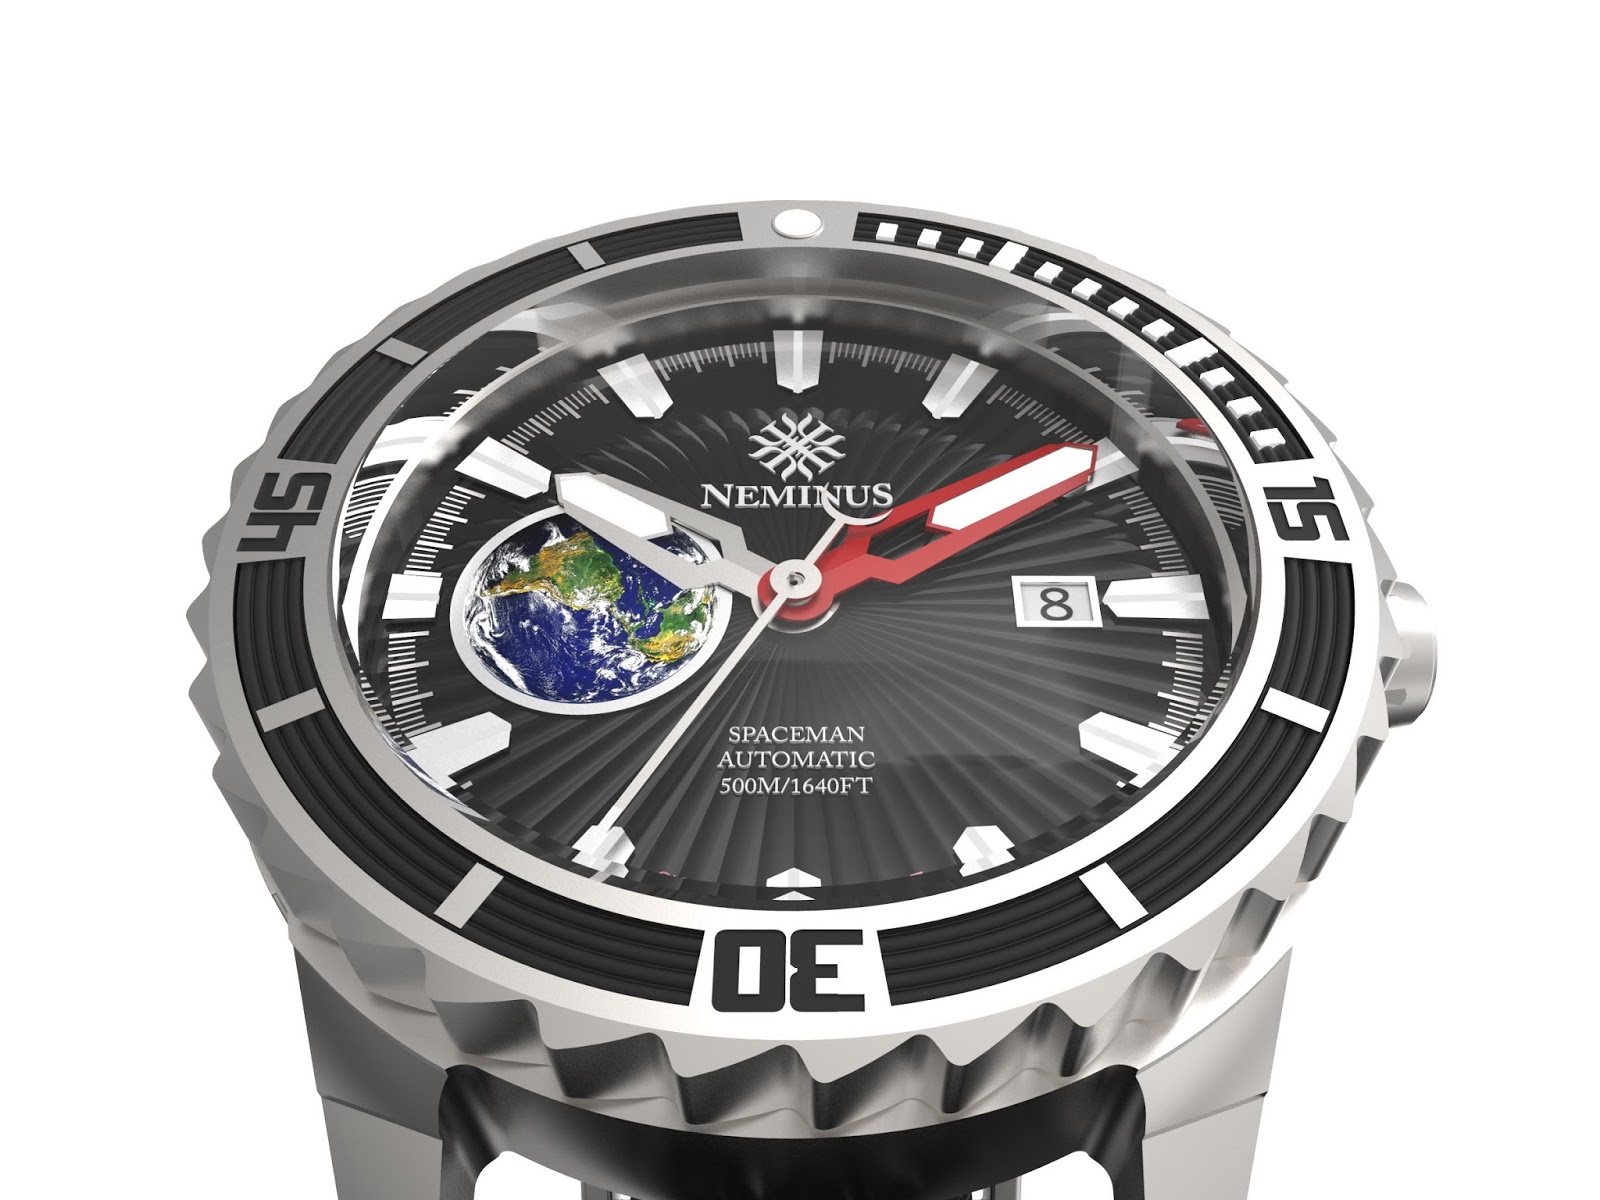 Neminus Spaceman Earth Dweller Swiss Automatic Diver Watch Limited Edition